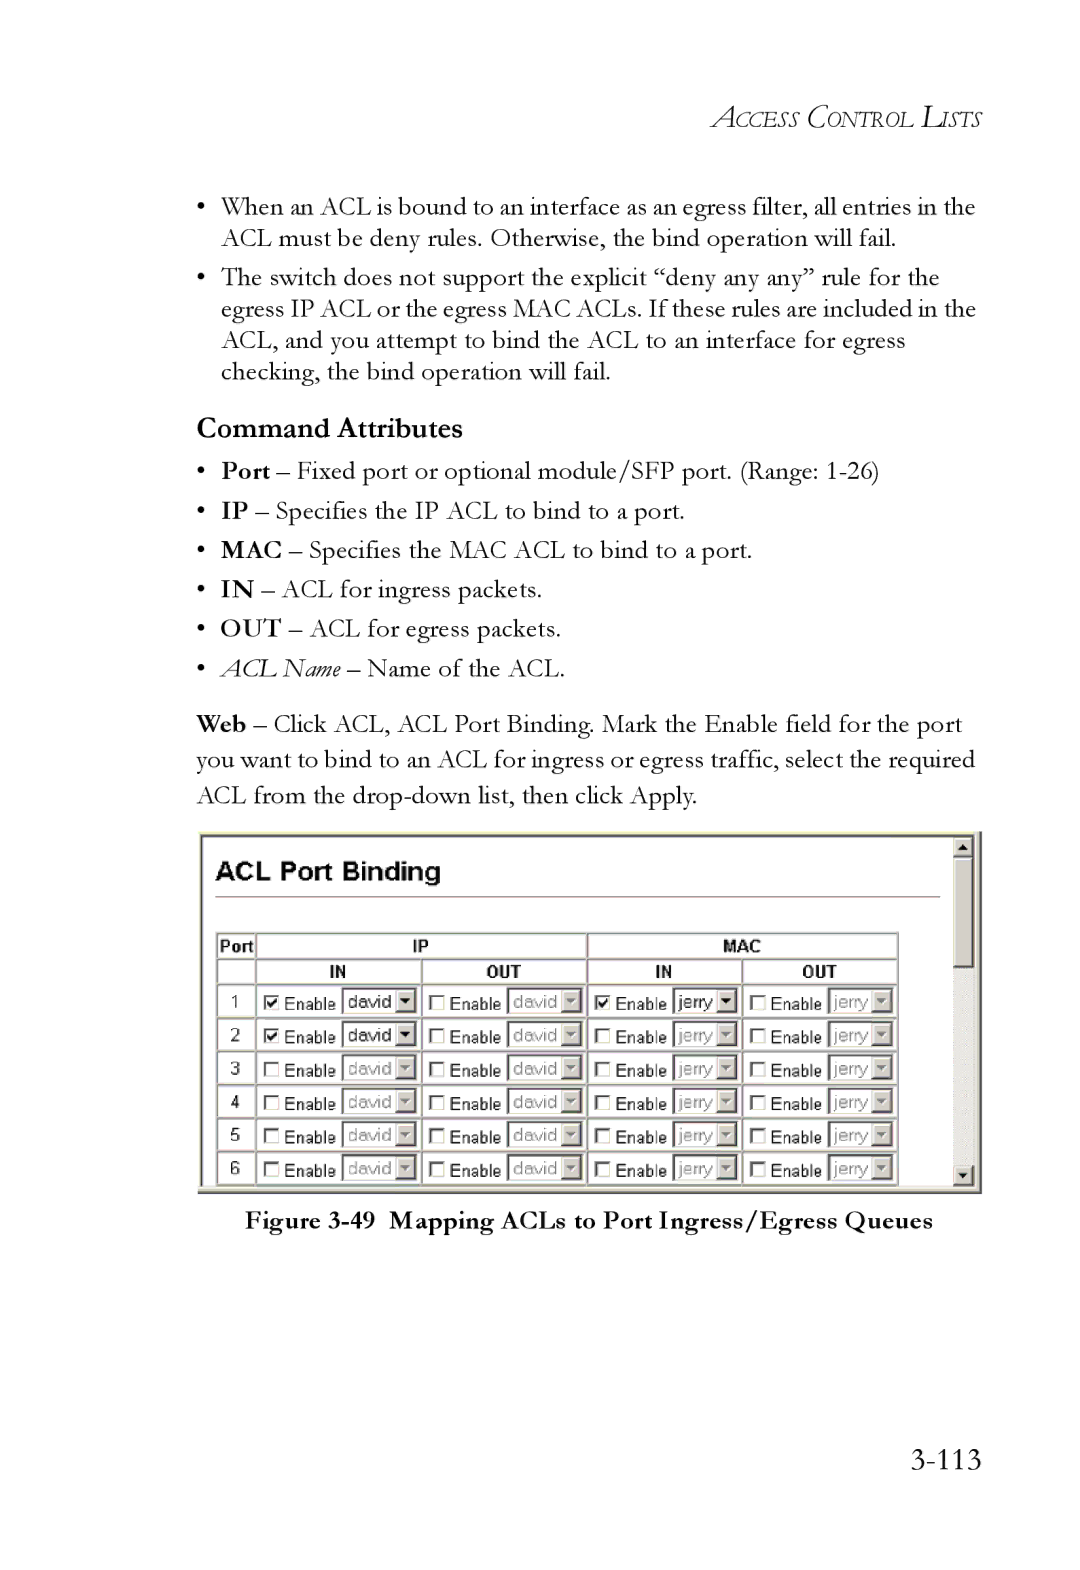 SMC Networks SMC6824M manual 113, Mapping ACLs to Port Ingress/Egress Queues 